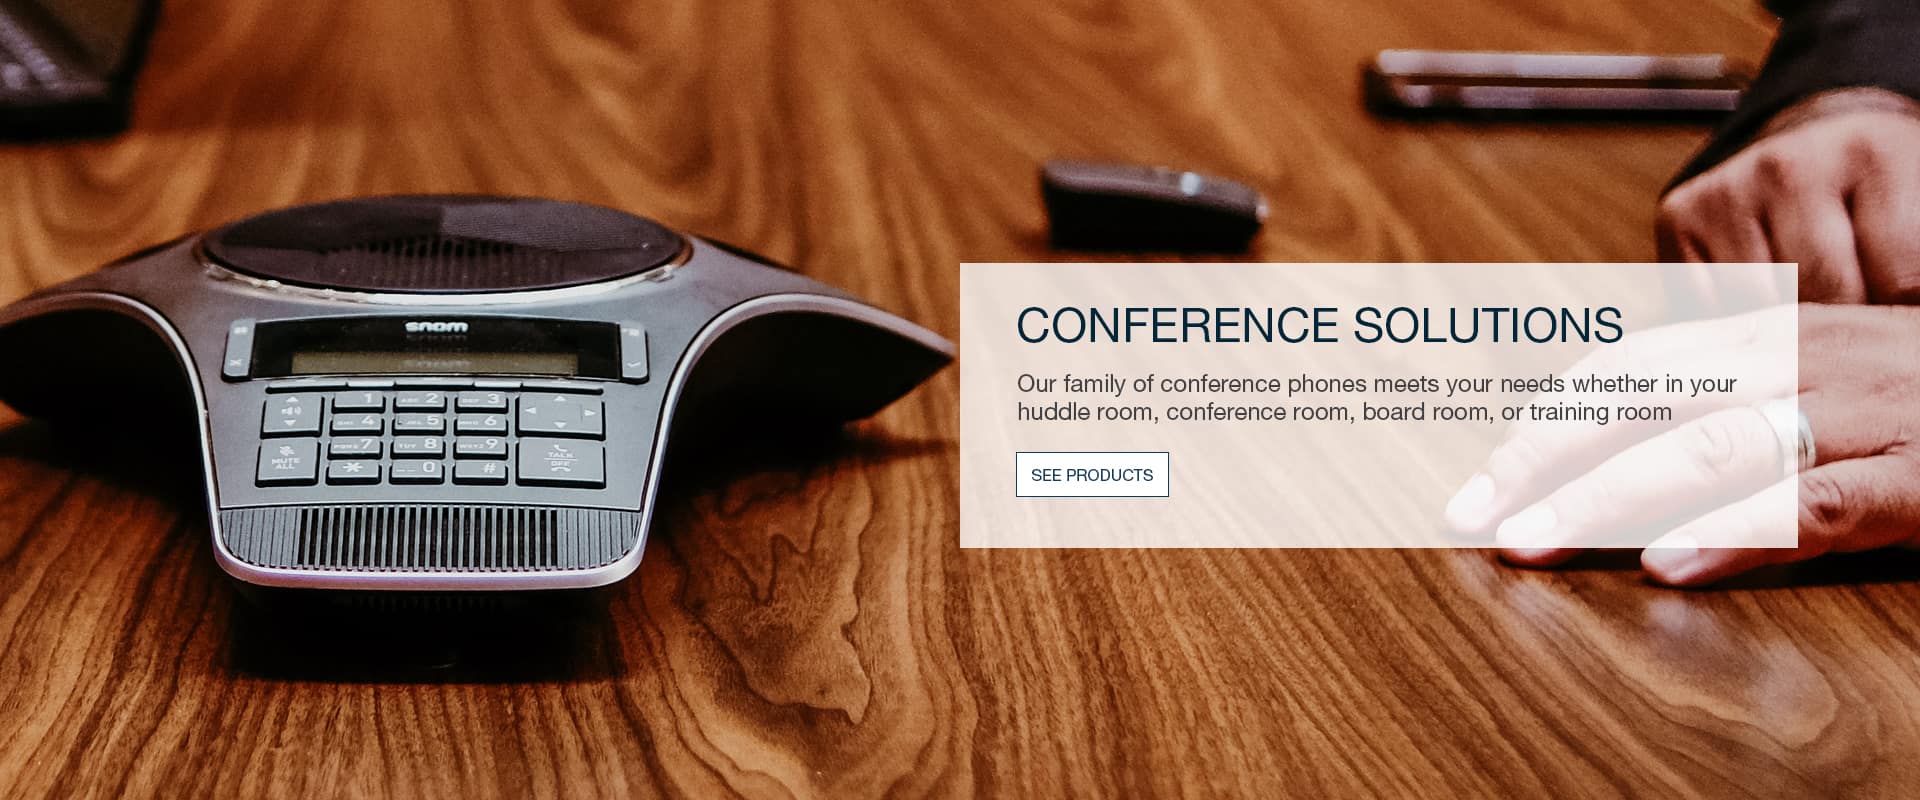 CONFERENCE SOLUTIONS Our family of conference phones meets your needs whether in your huddle room, conference room, board room, or training room